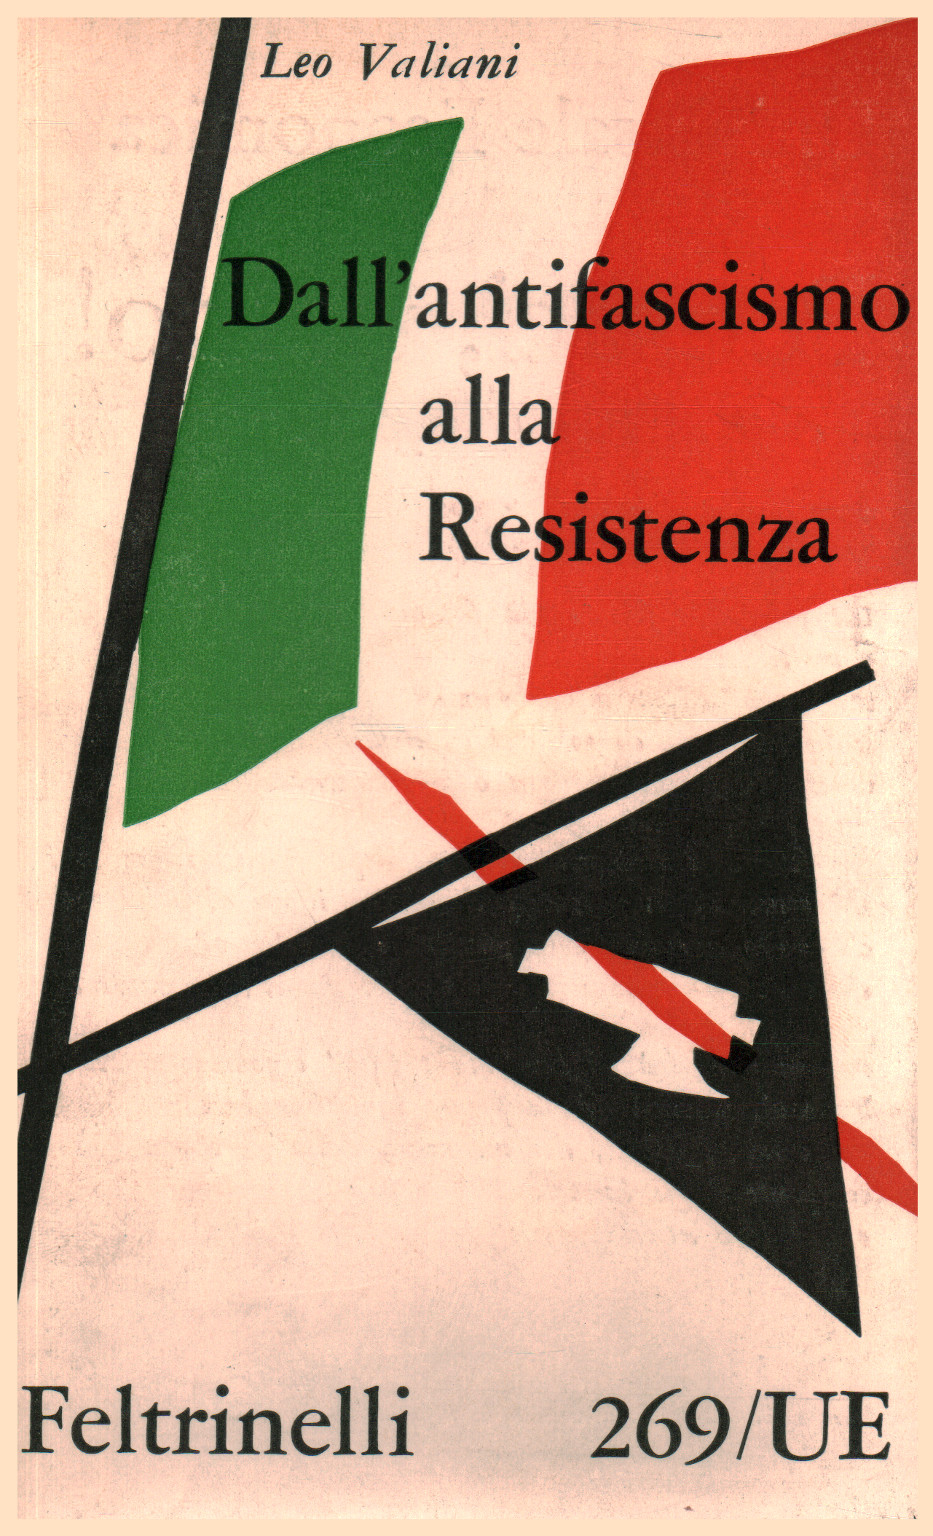 From anti-fascism to the Resistance, s.a.